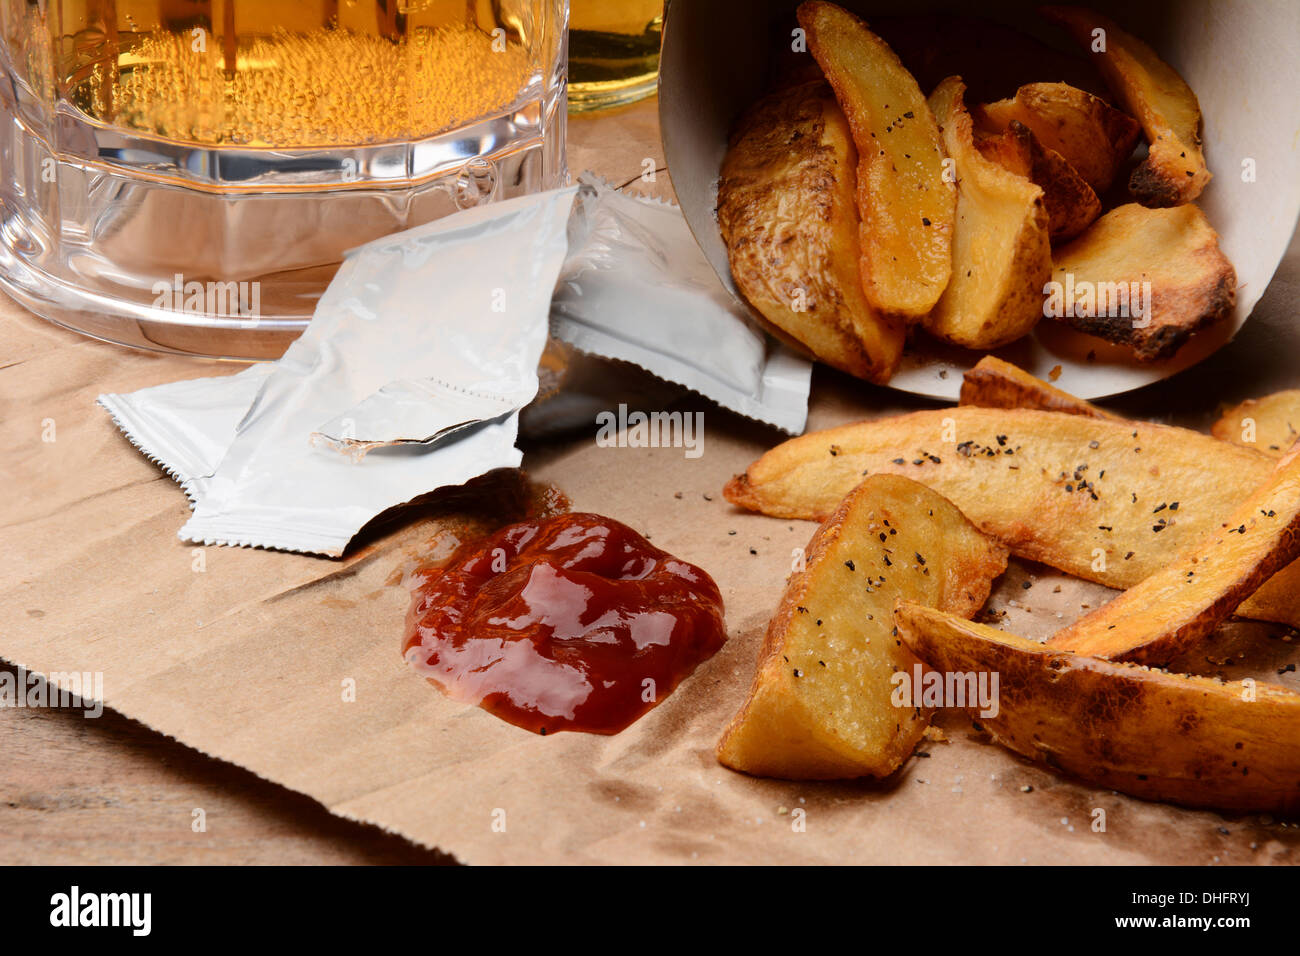 French Fries spilled onto a brown bag. Ketchup dollop and packets with salt and pepper and mug of beer. Stock Photo